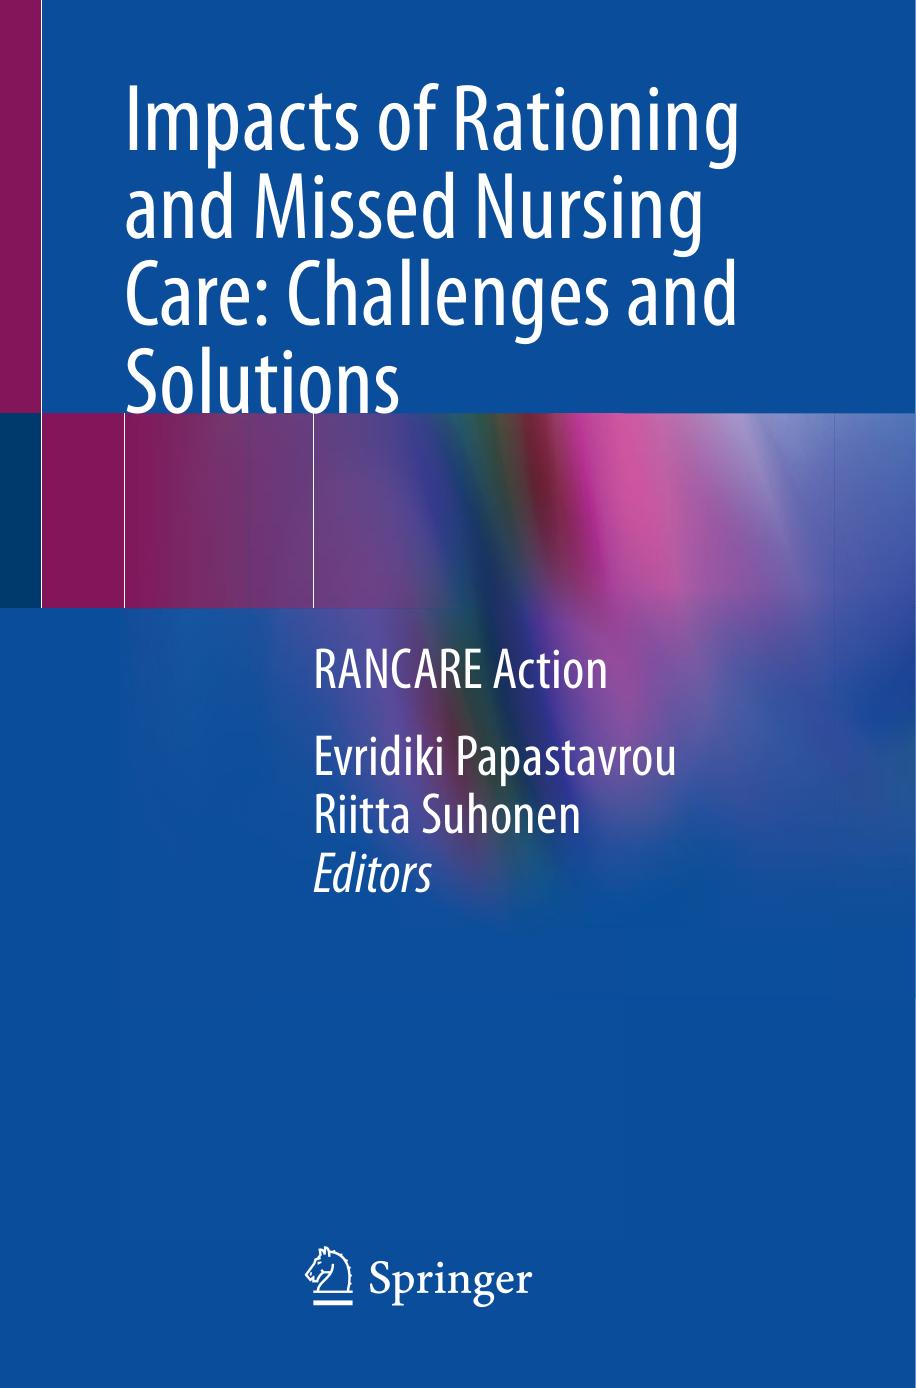 Impacts of Rationing and Missed Nursing Care  Challenges and Solutions (2121)